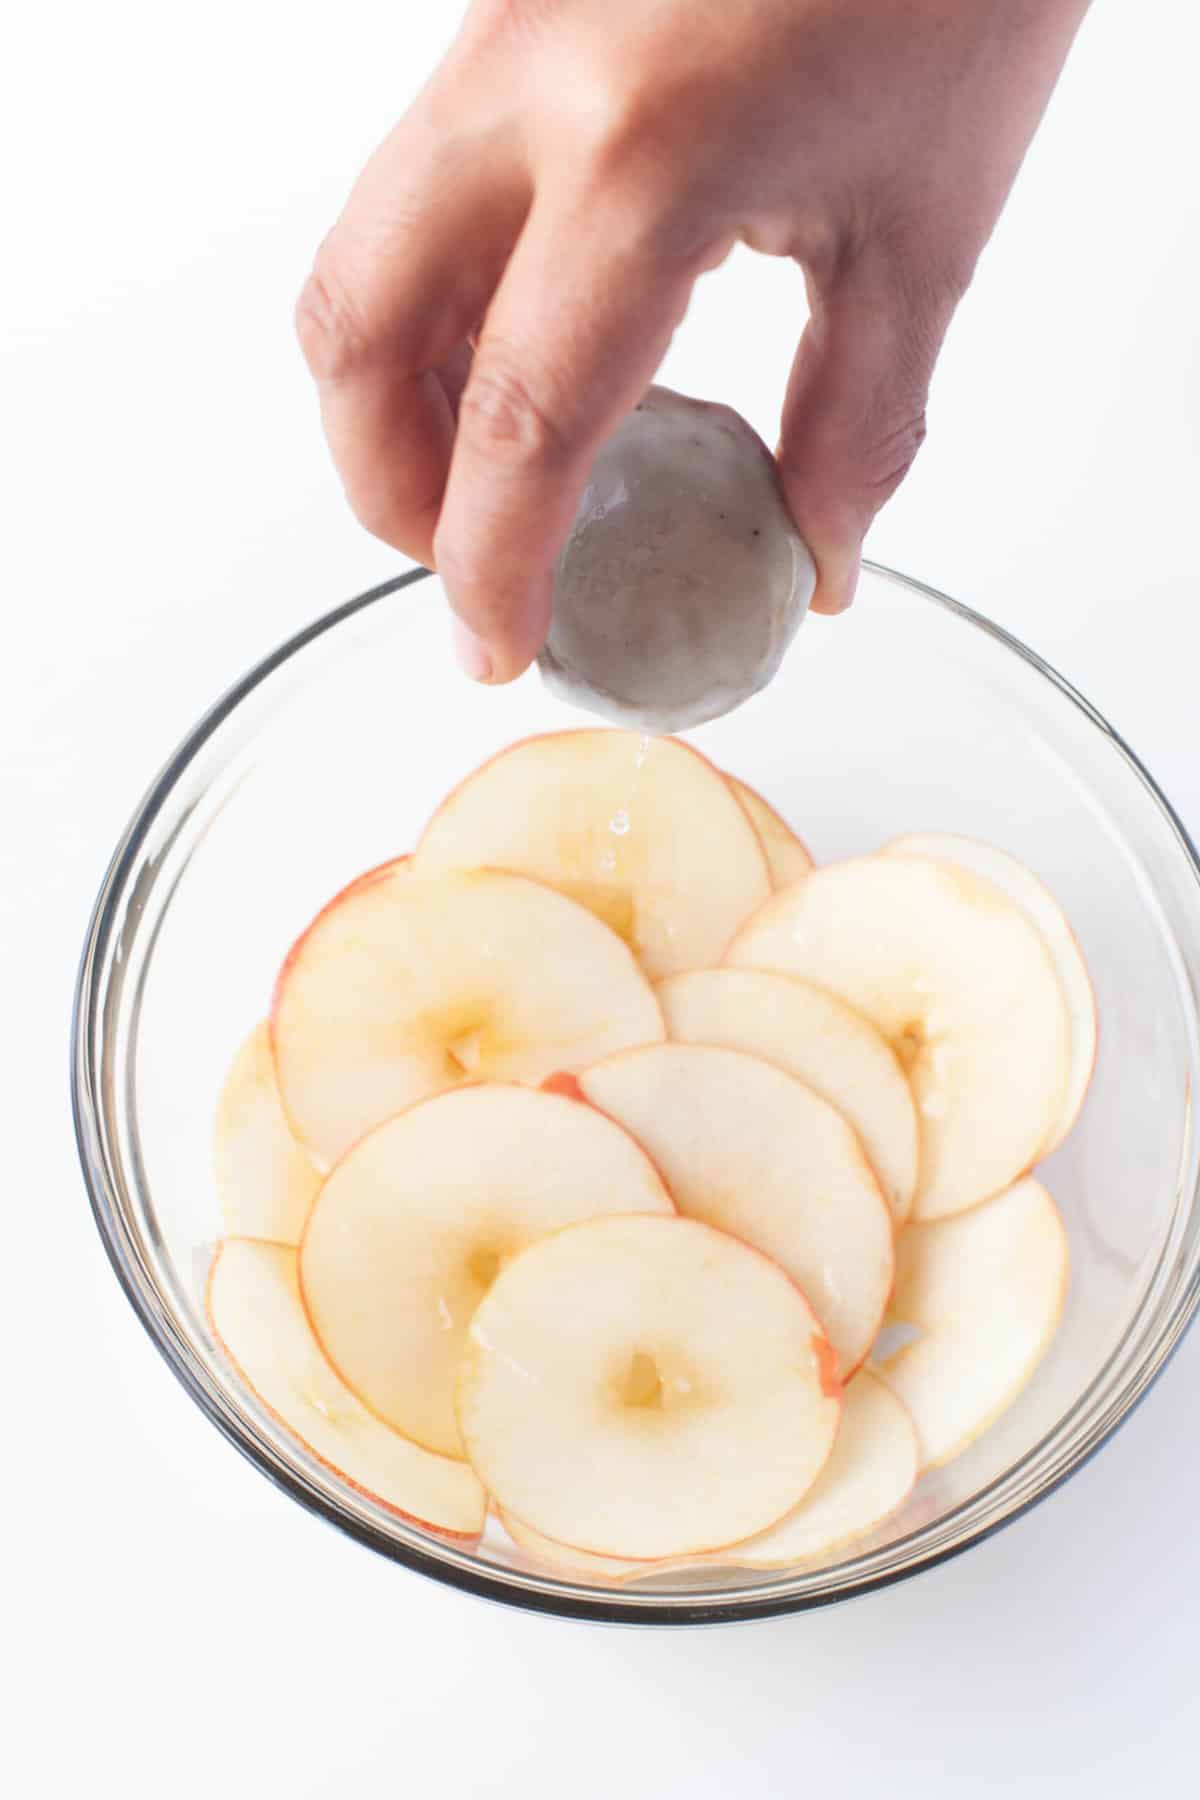 Adding melted coconut oil to thinly sliced apples.